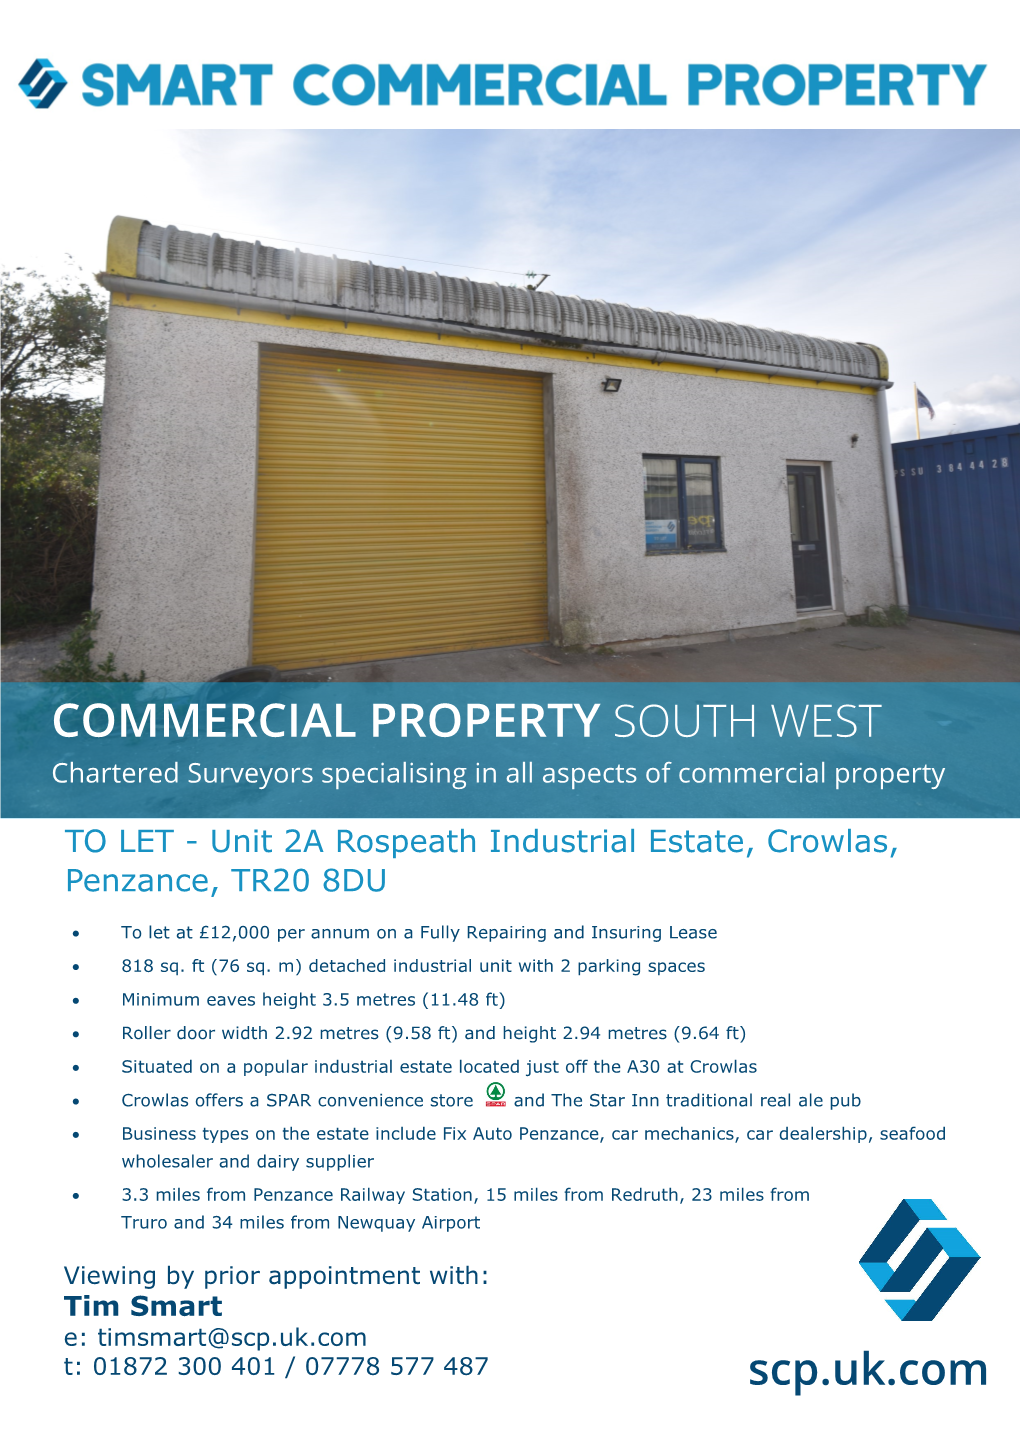 COMMERCIAL PROPERTY SOUTH WEST Chartered Surveyors Specialising in All Aspects of Commercial Property